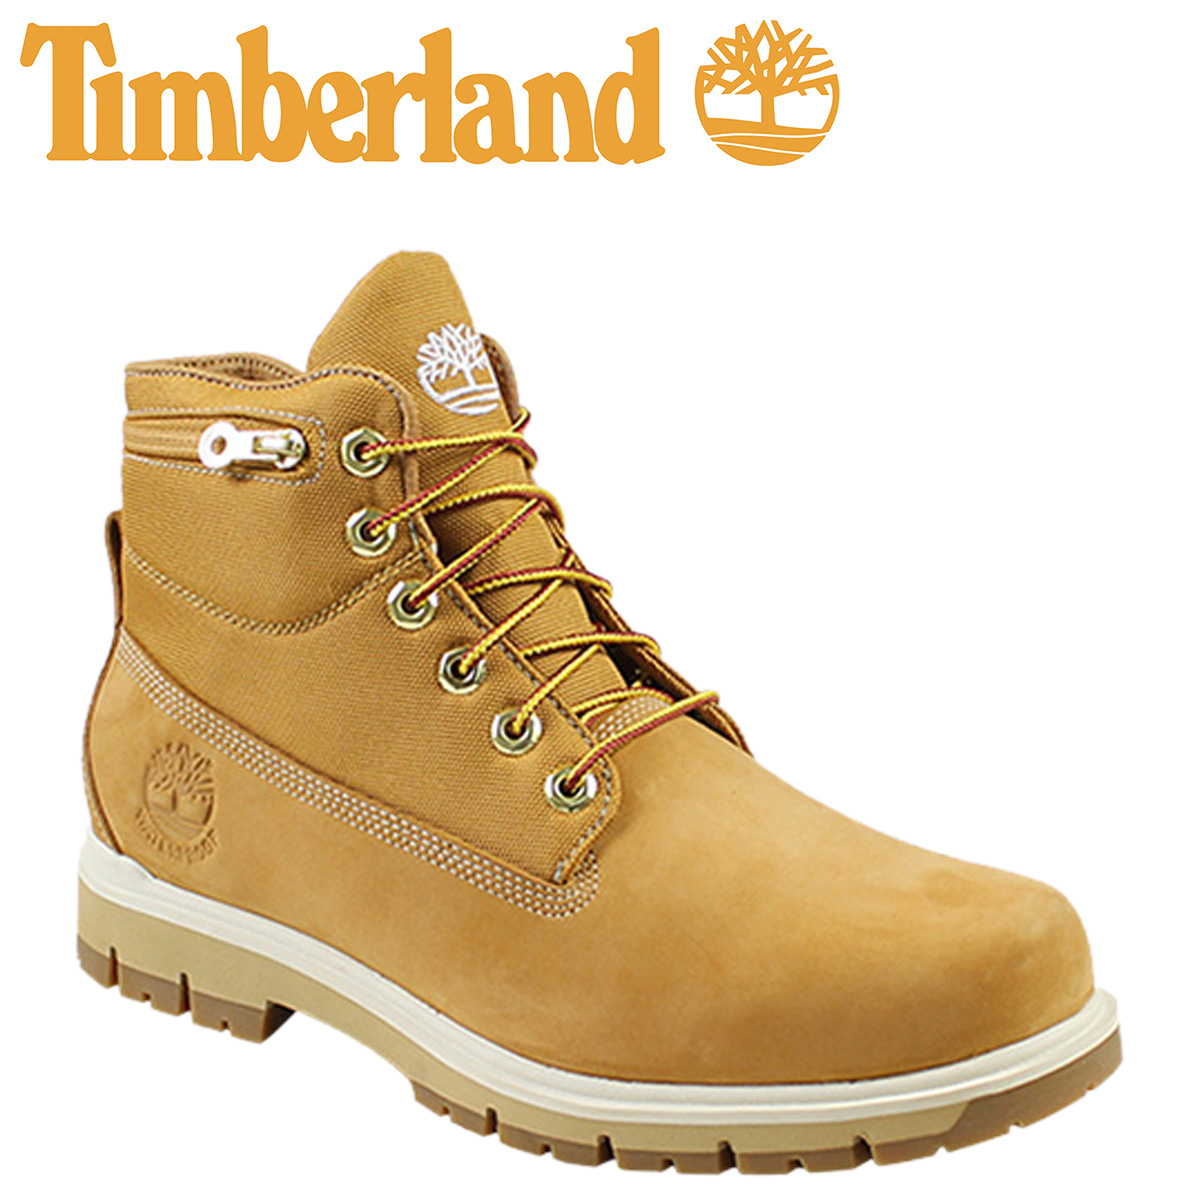 difference between timberland radford and premium